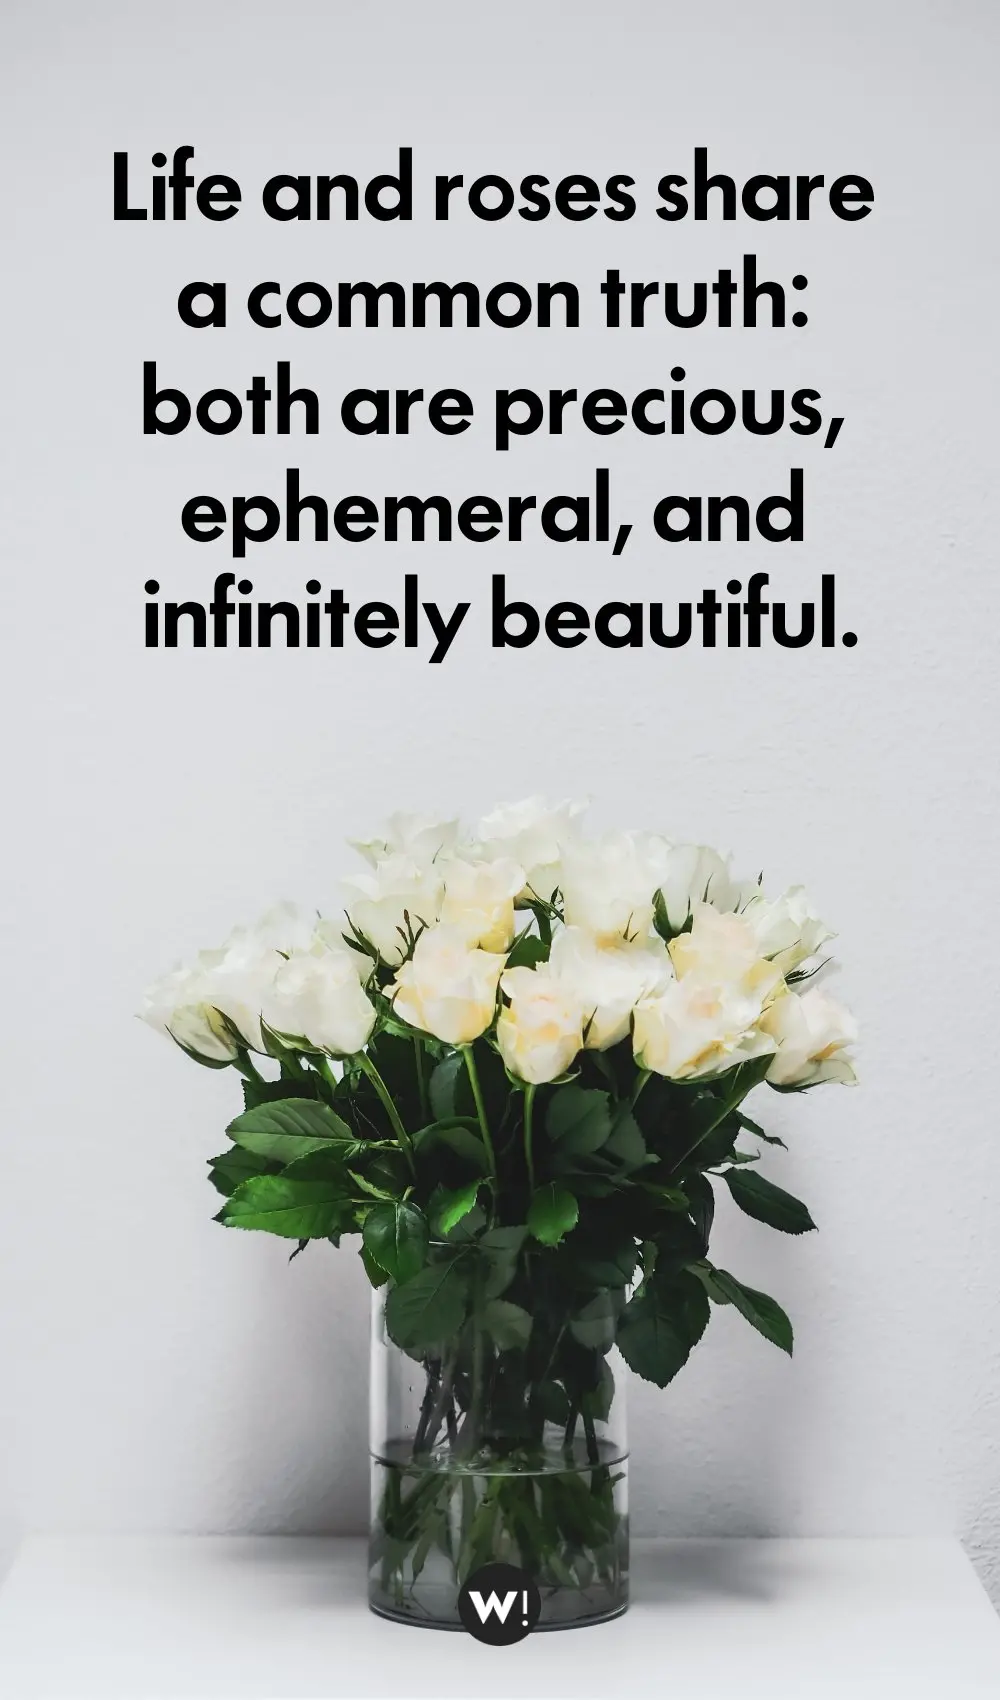 Quotes About Roses In Life Life And Roses Share A Common Truth